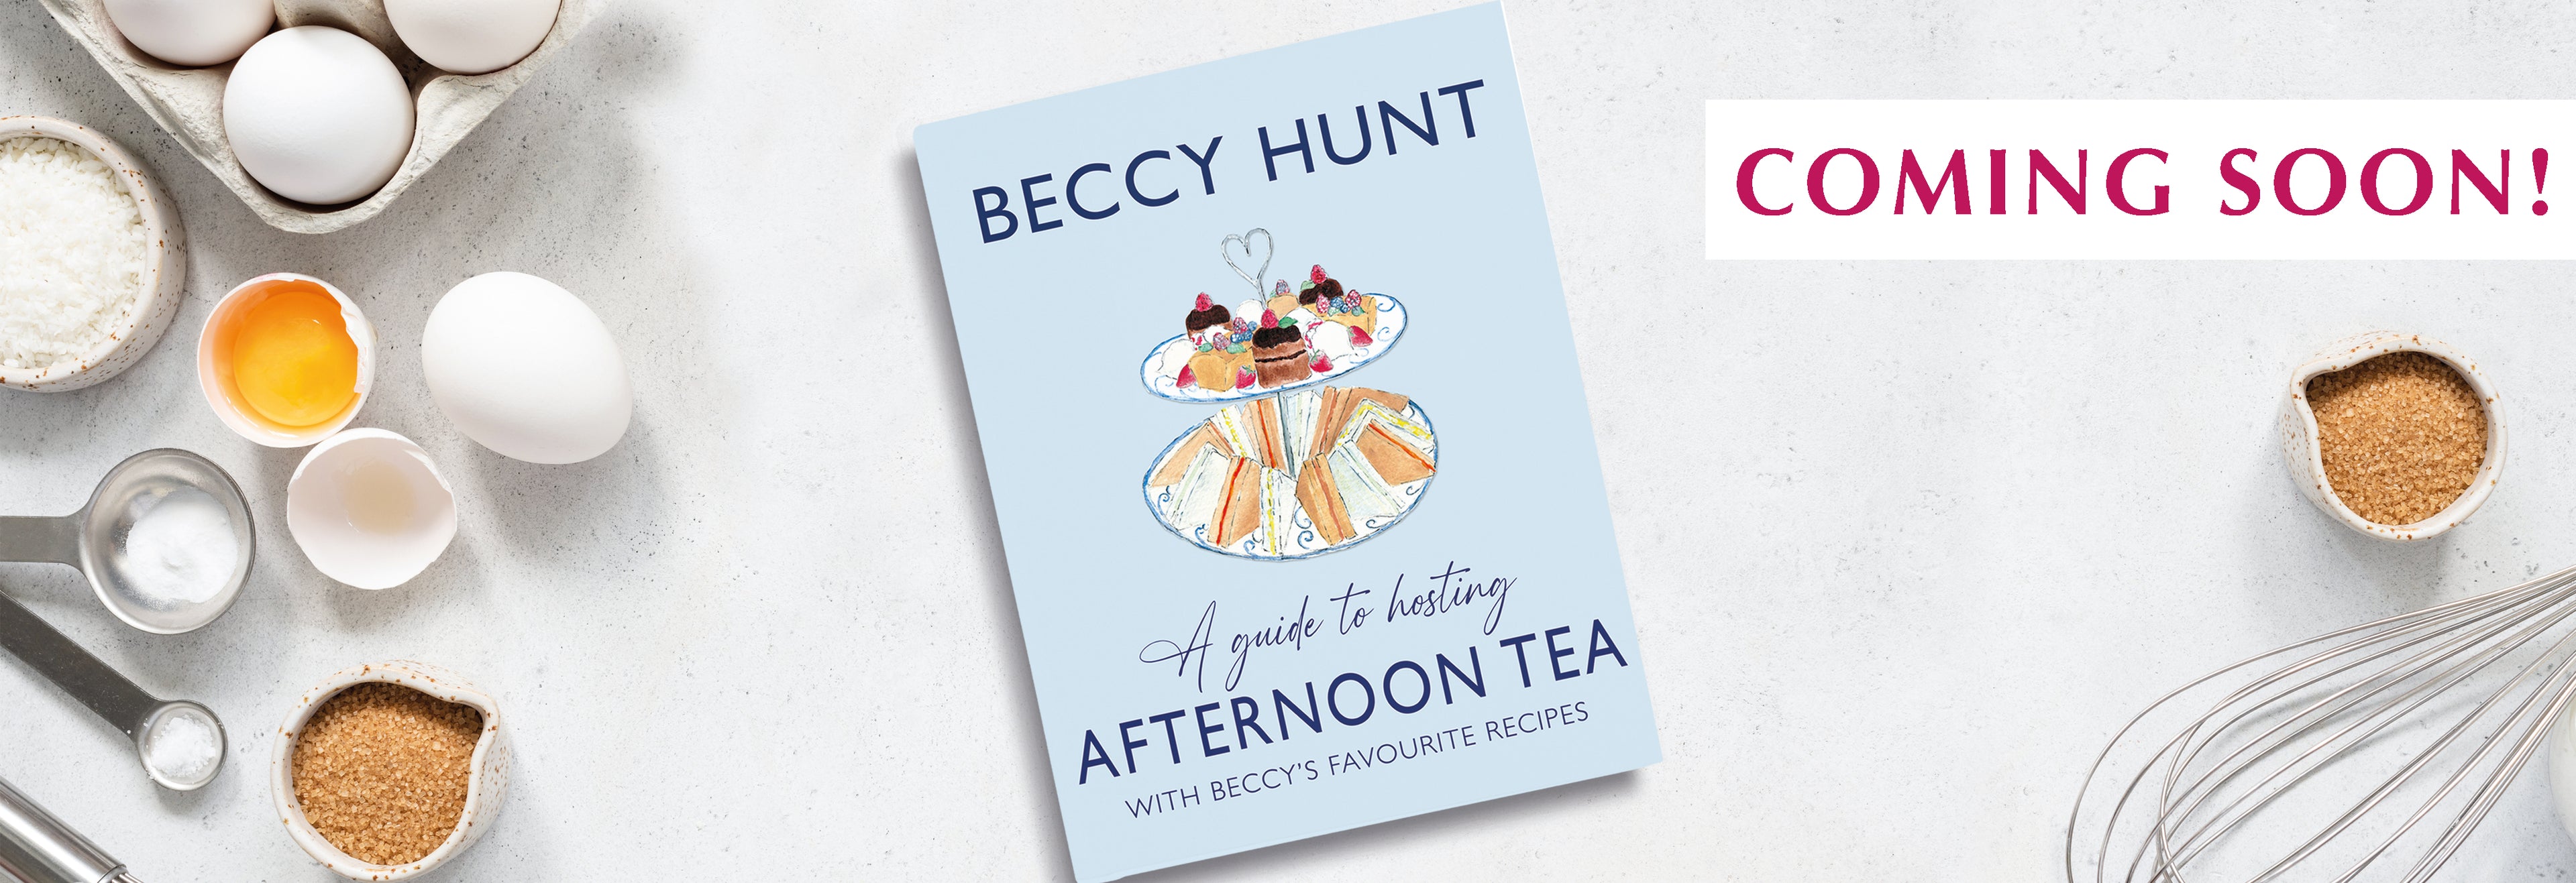 A guide to hosting Afternoon Tea  with Beccy's favourite recipes book by Beccy Hunt